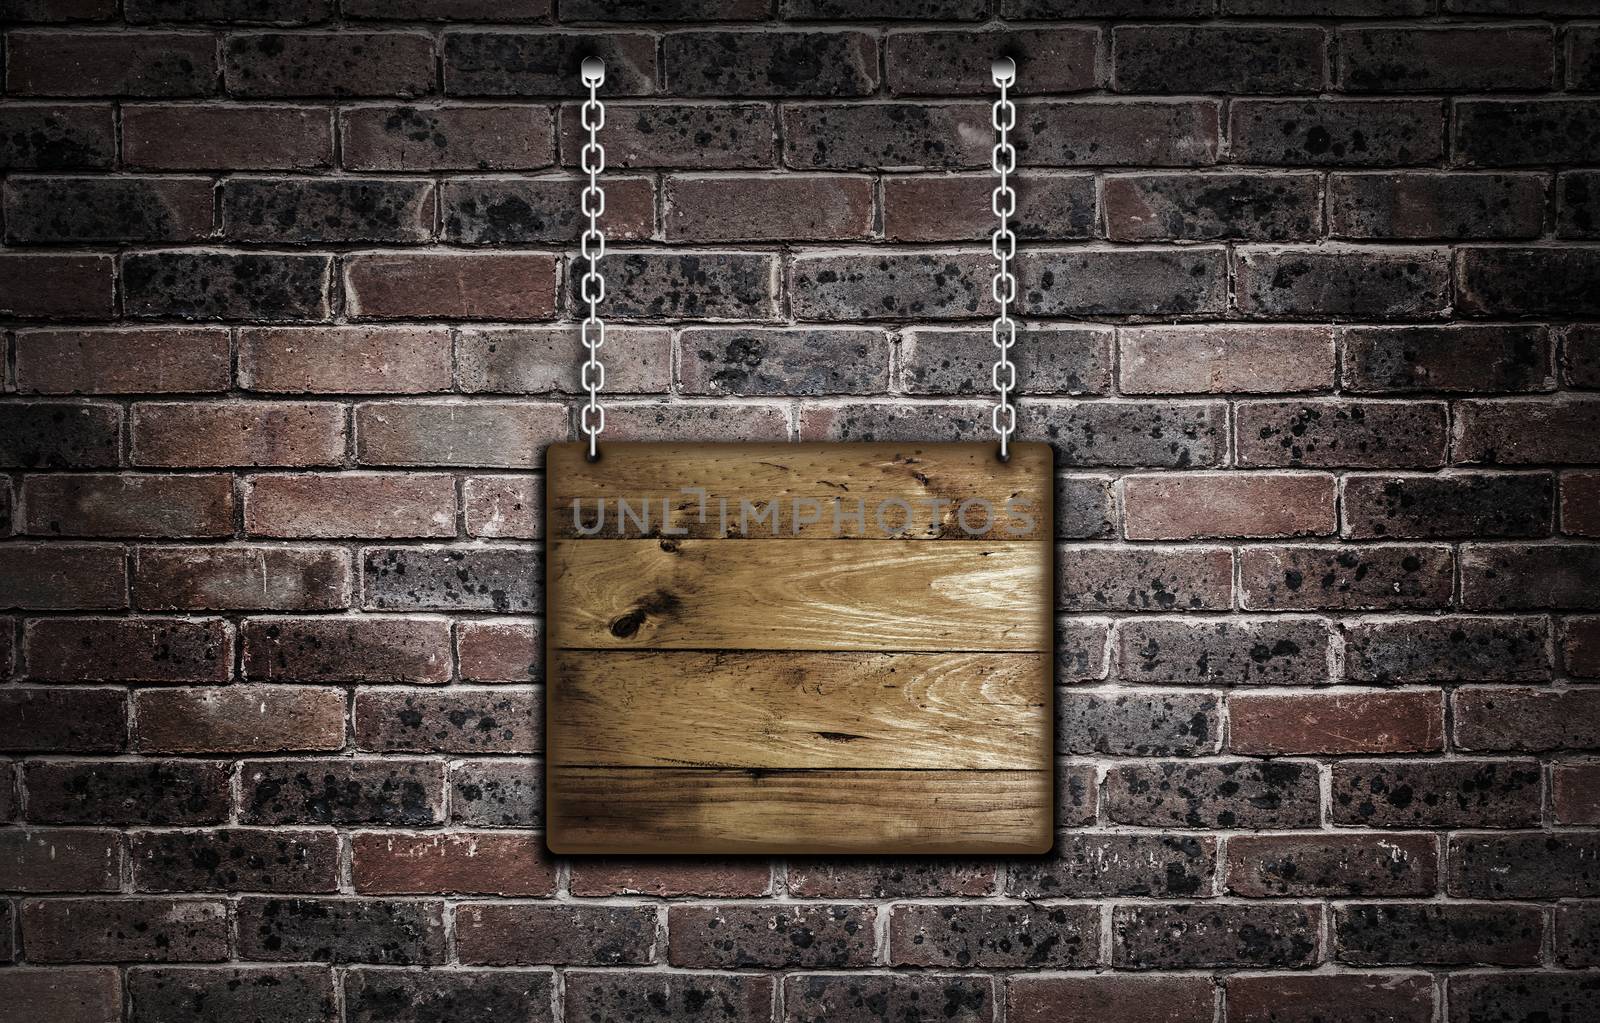 Wooden hanging sign over a brick background.